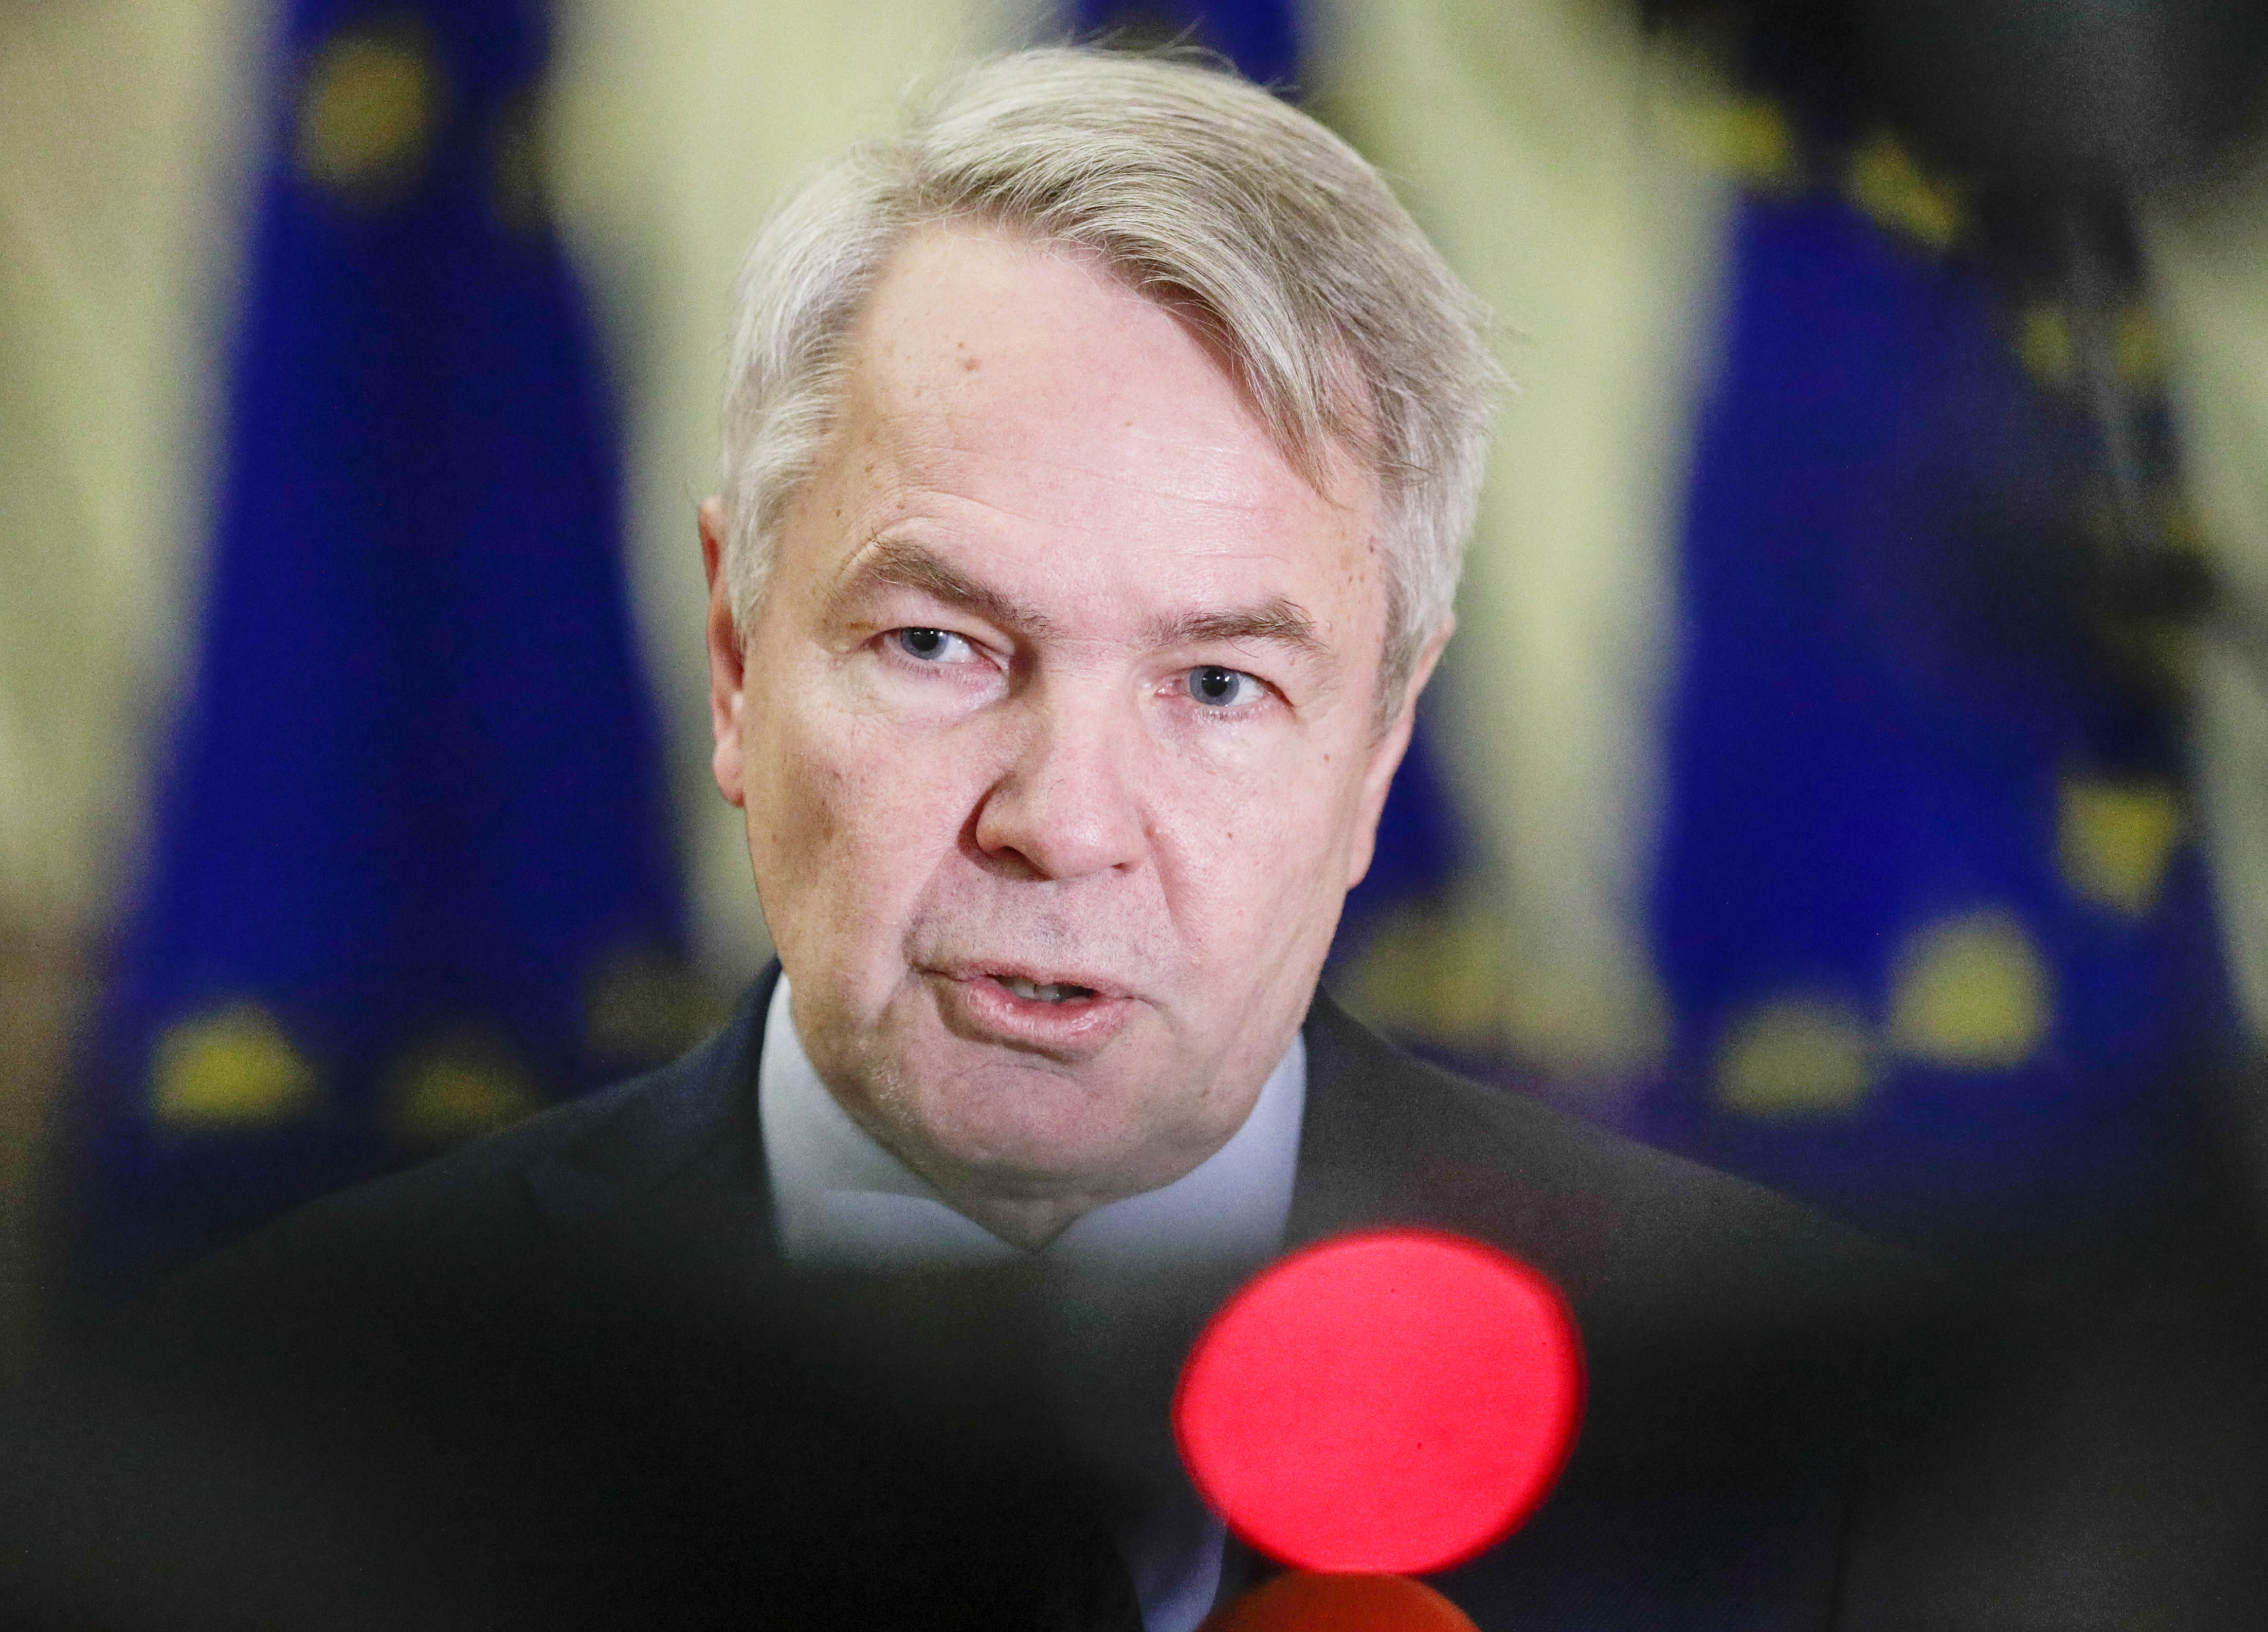 Pekka Haavisto: Finland may have to consider joining NATO without Sweden